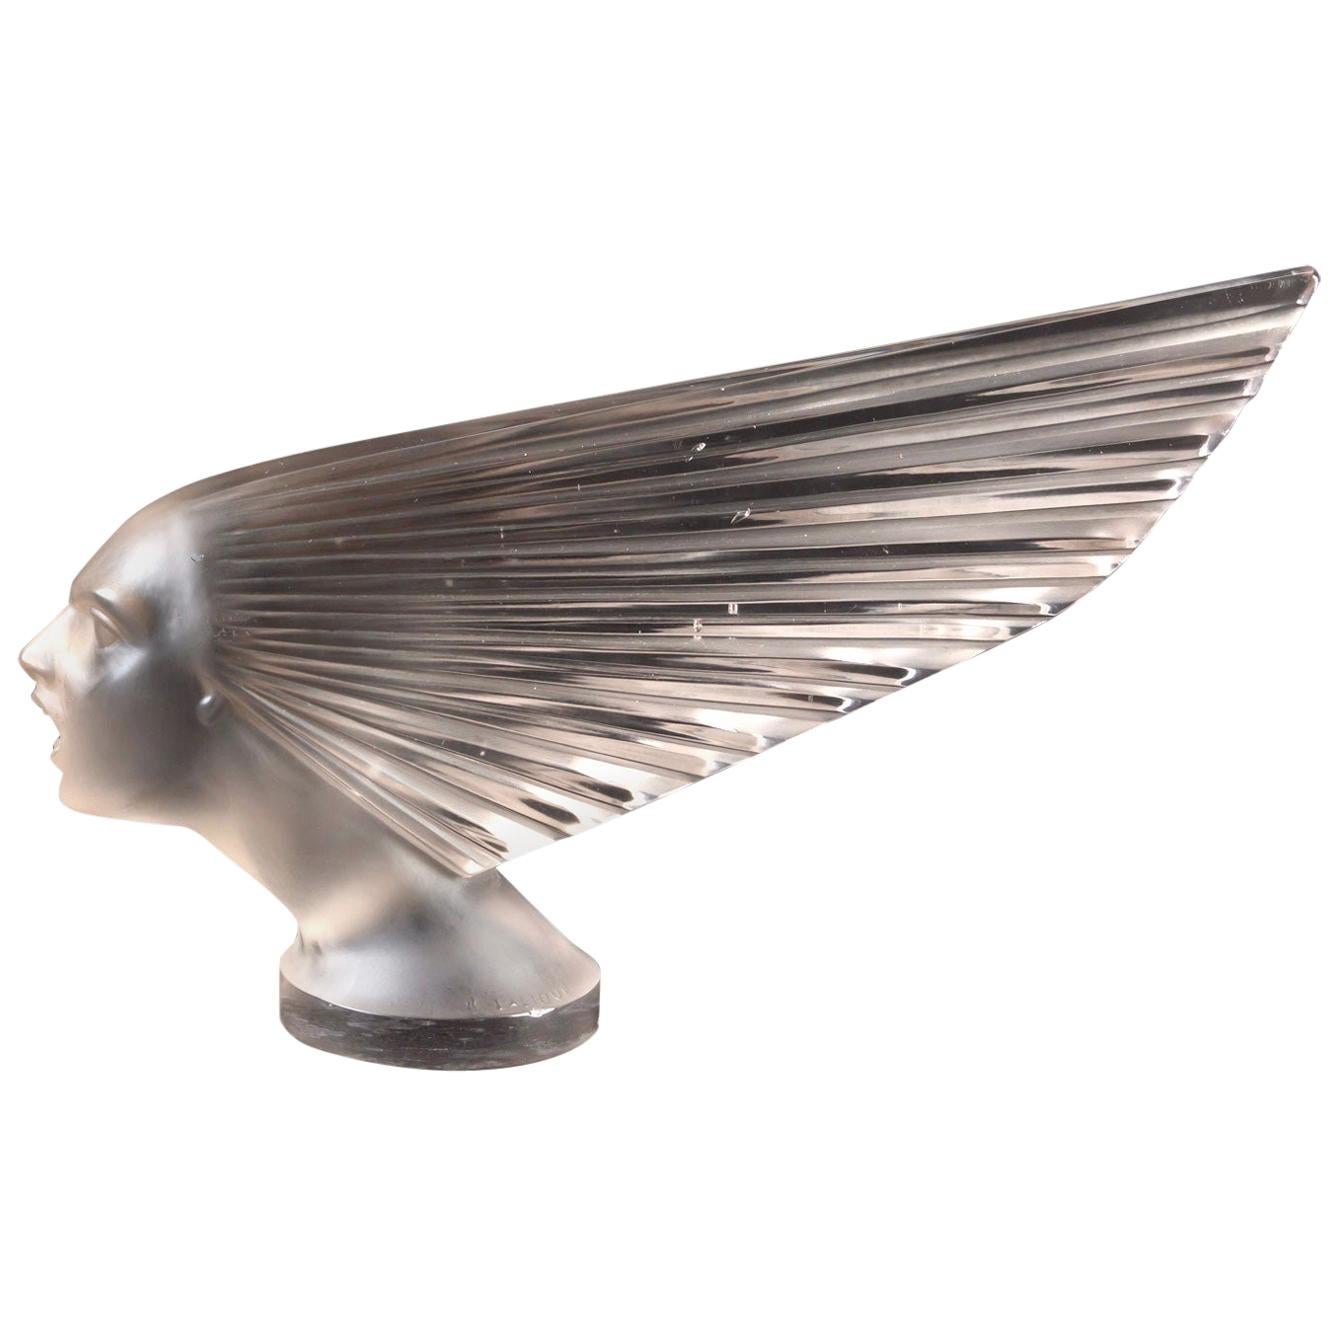 1928 René Lalique Victoire Car Mascot Hood Ornament in Frosted Glass